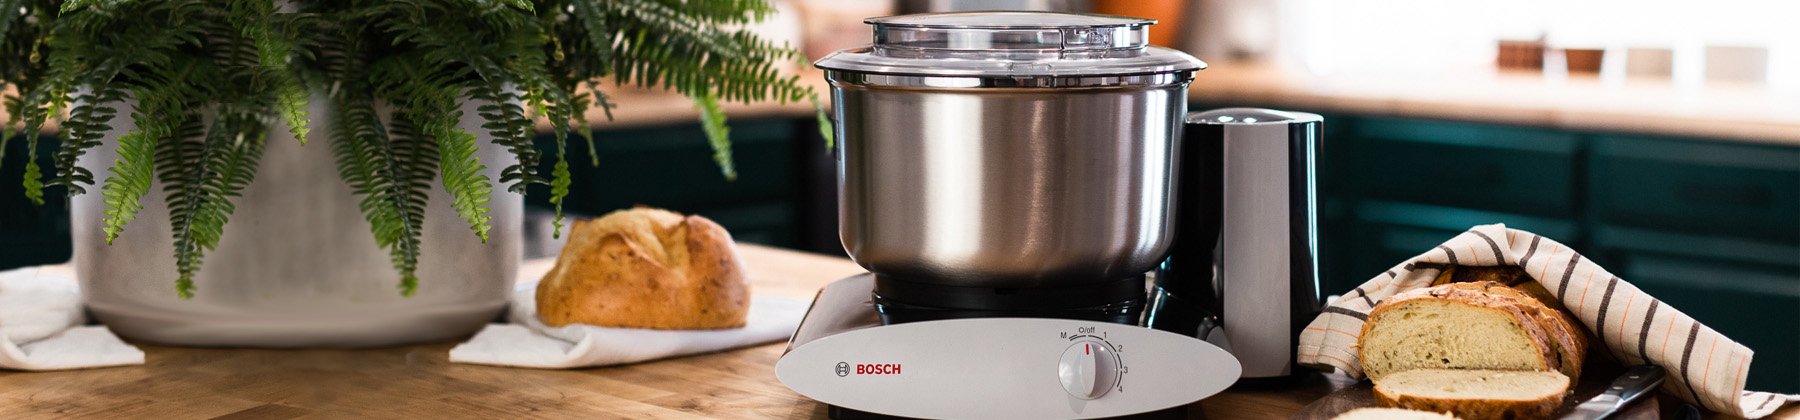 Photo of Bosch mixer and accessories.